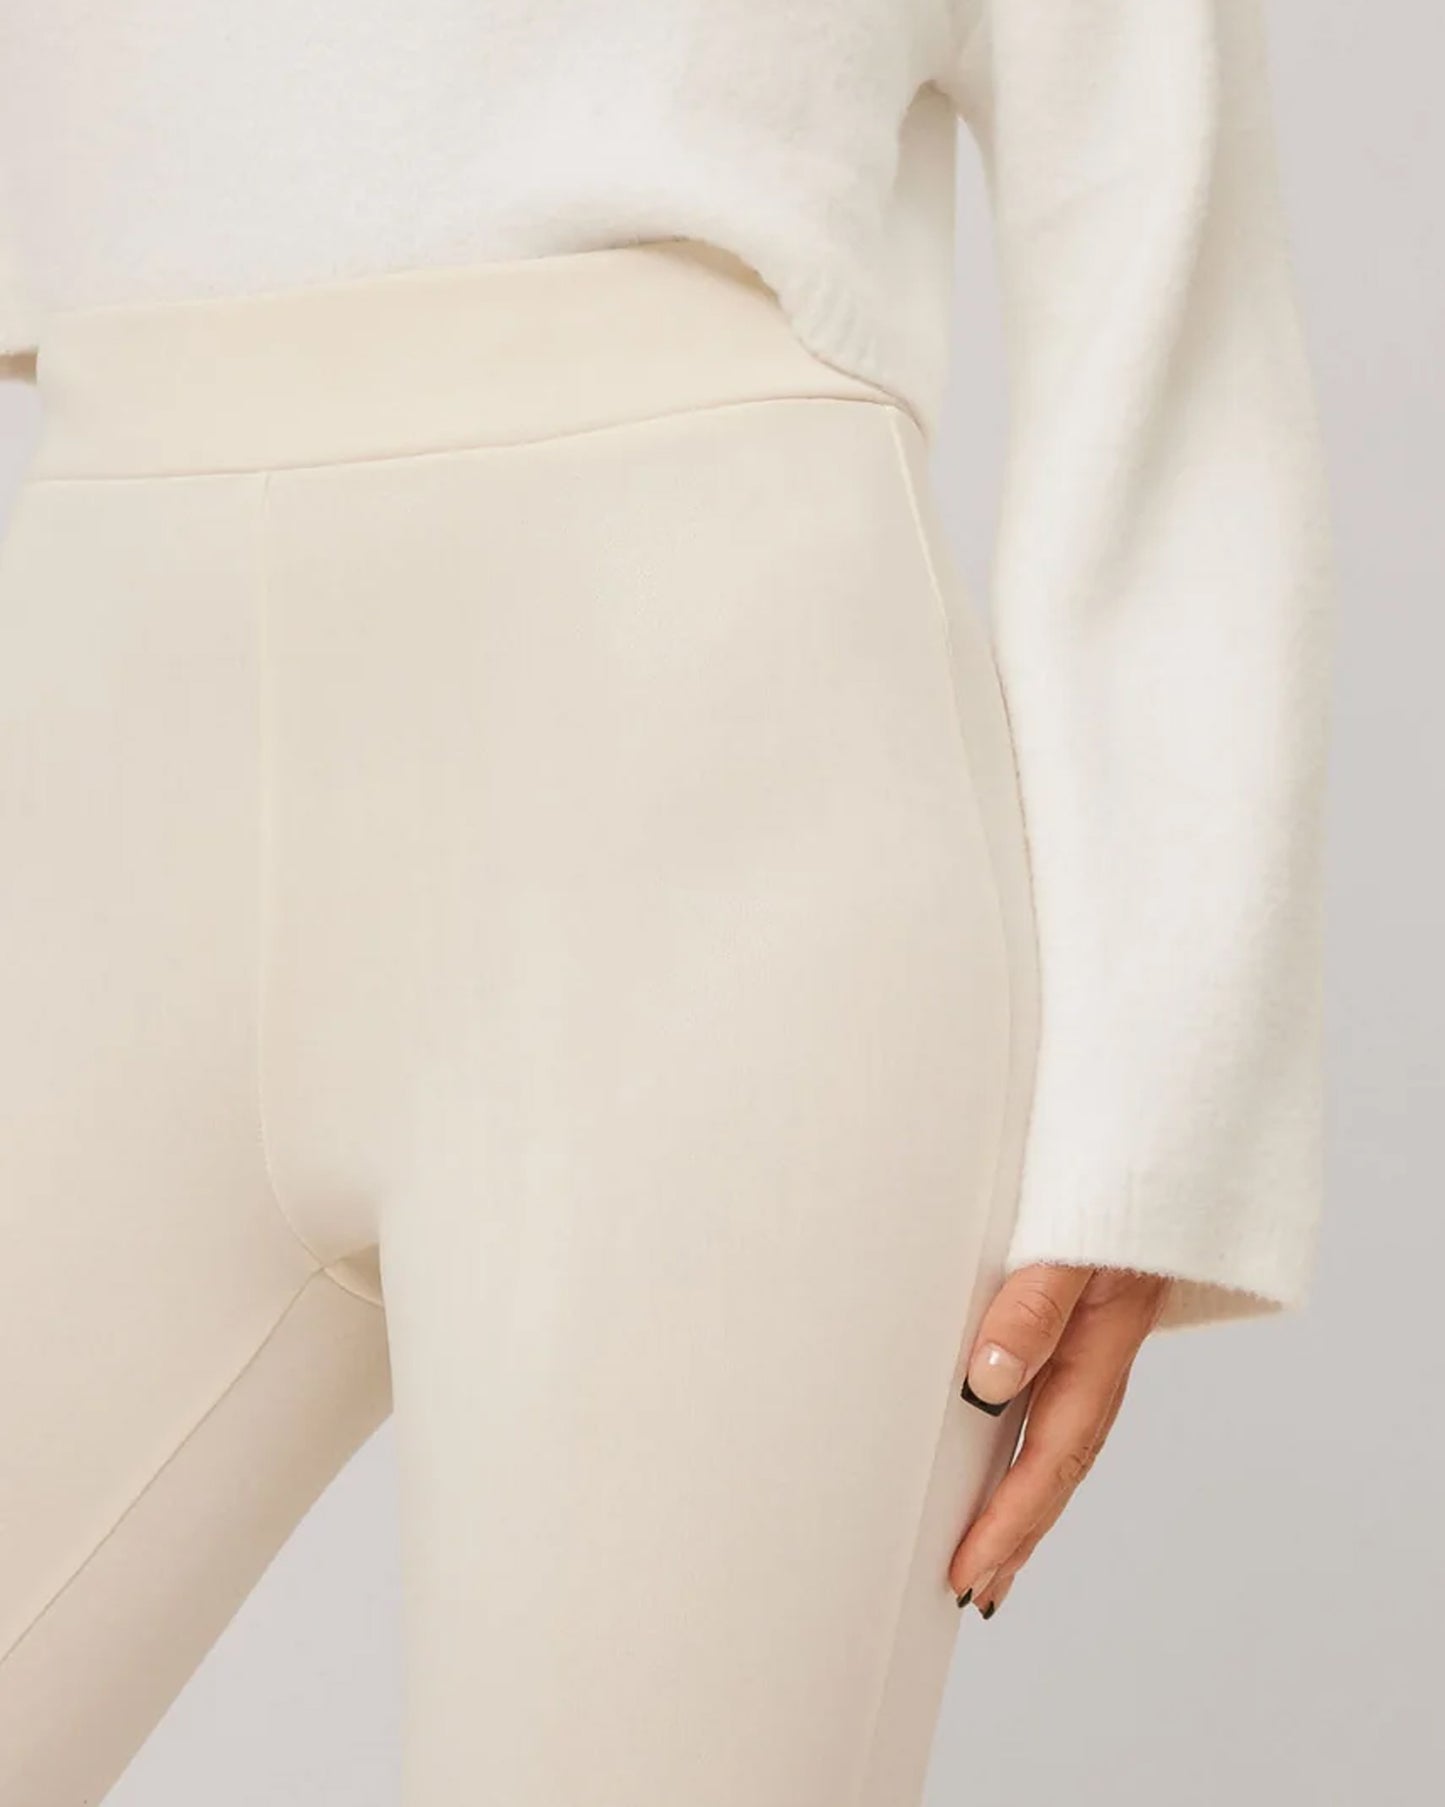 Black high waisted trouser leggings with faux leather look, worn with soft knitted cream jumper.